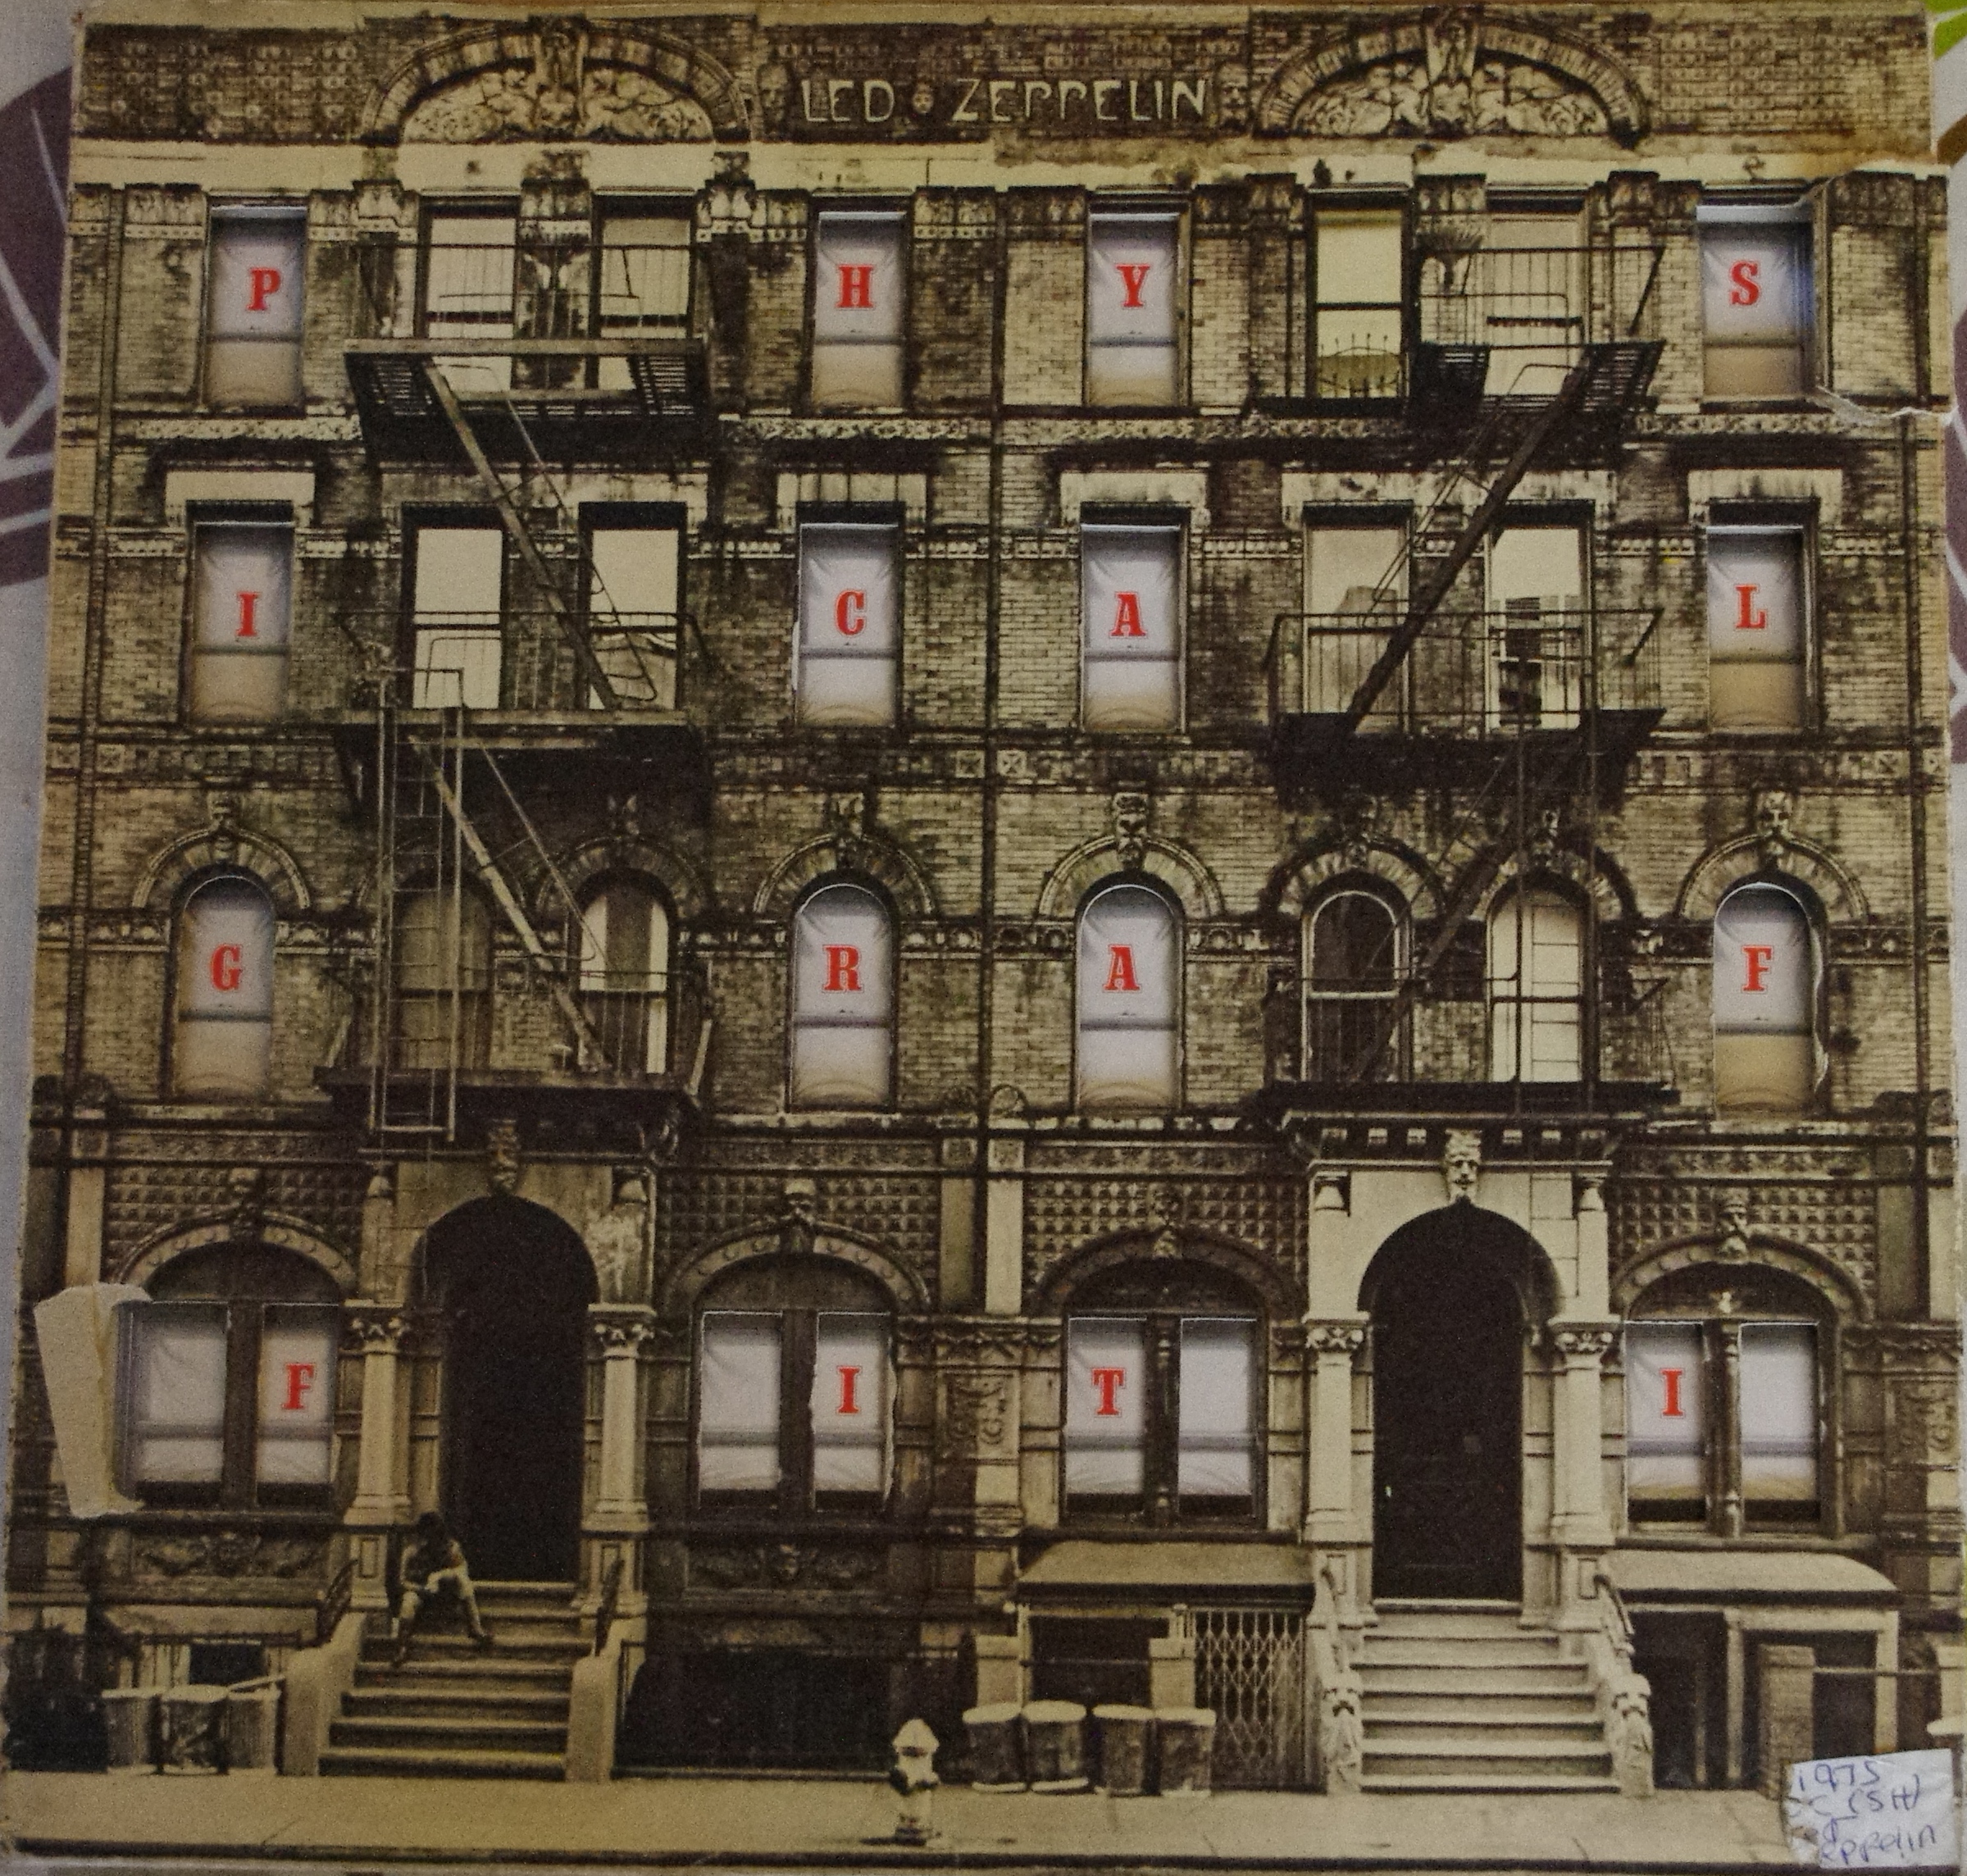 Led zeppelin physical. Physical Graffiti группы led Zeppelin. Led Zeppelin physical Graffiti обложка. Led Zeppelin physical Graffiti 1975. Led Zeppelin physical Graffiti обложка альбома.